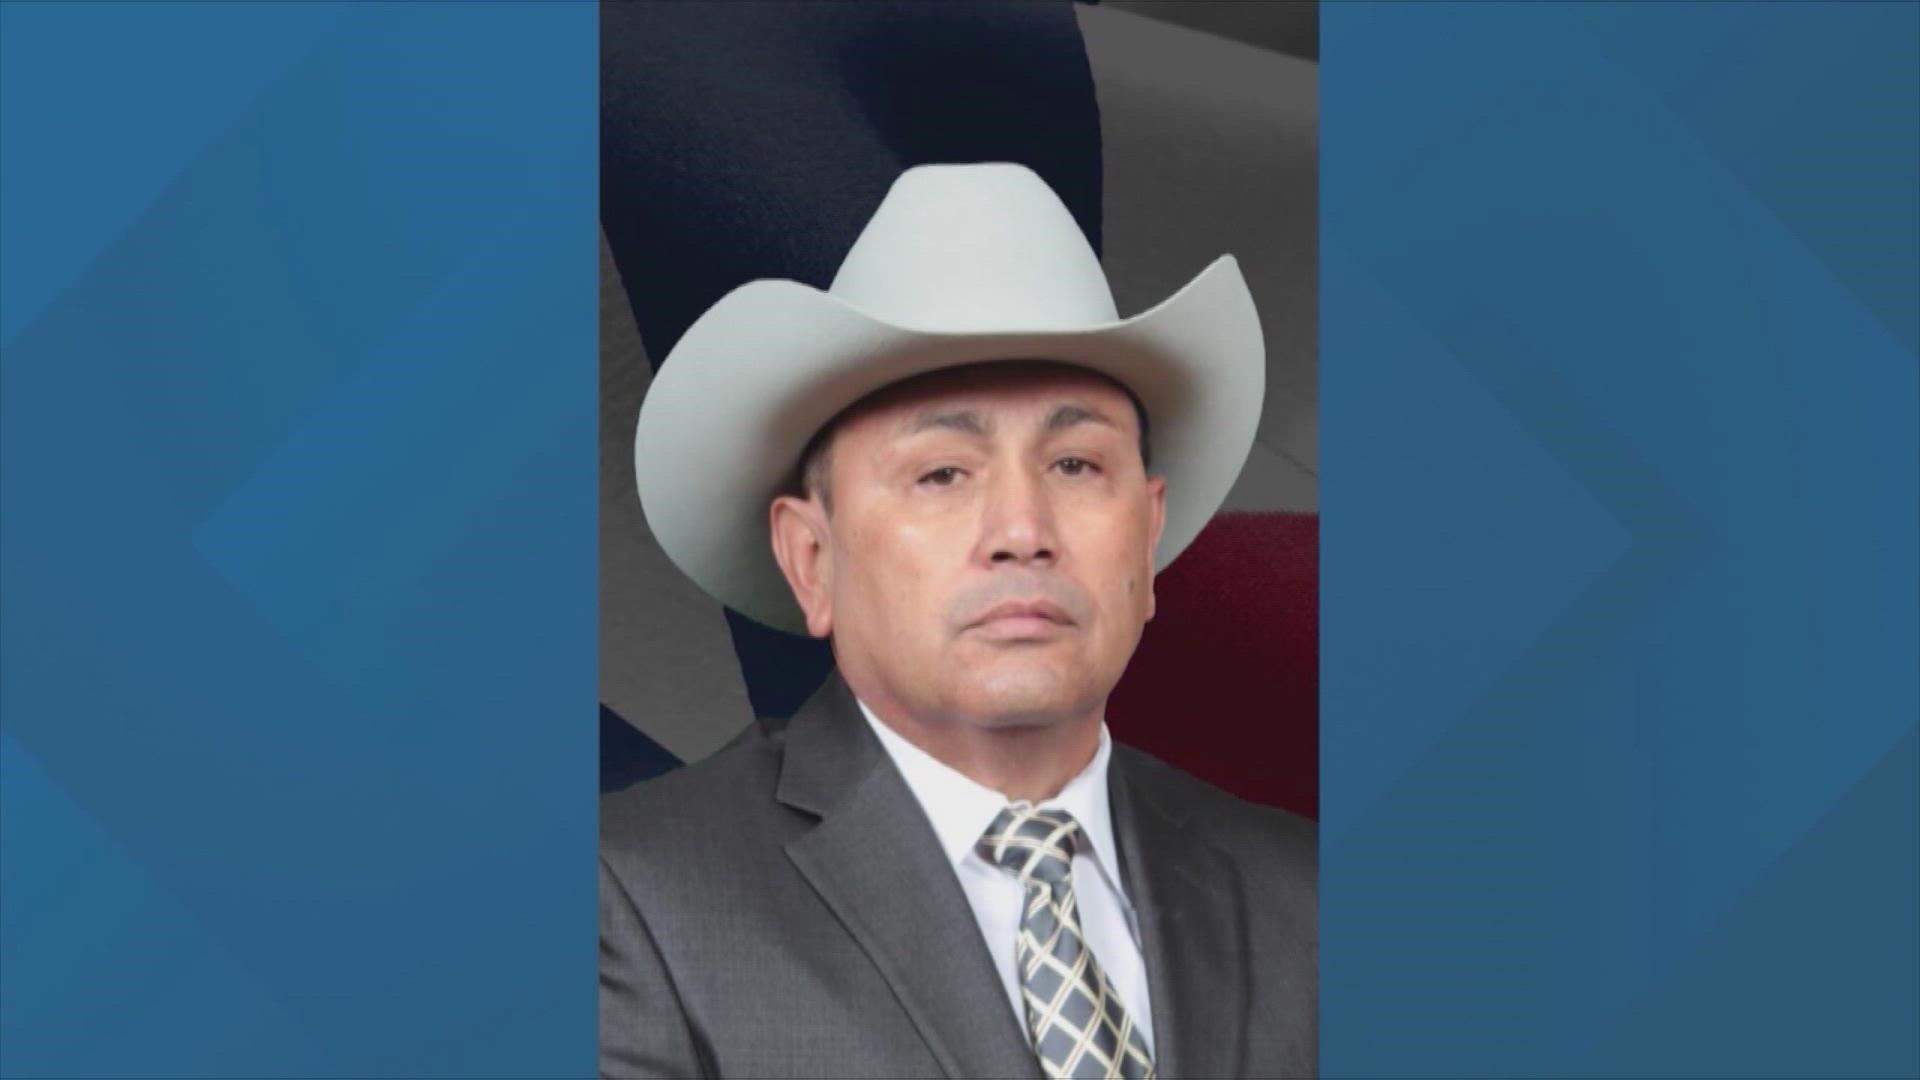 The report says the sheriff of Uvalde County, Ruben Nolasco, had vital information about the shooter but did not share it with other law enforcement.